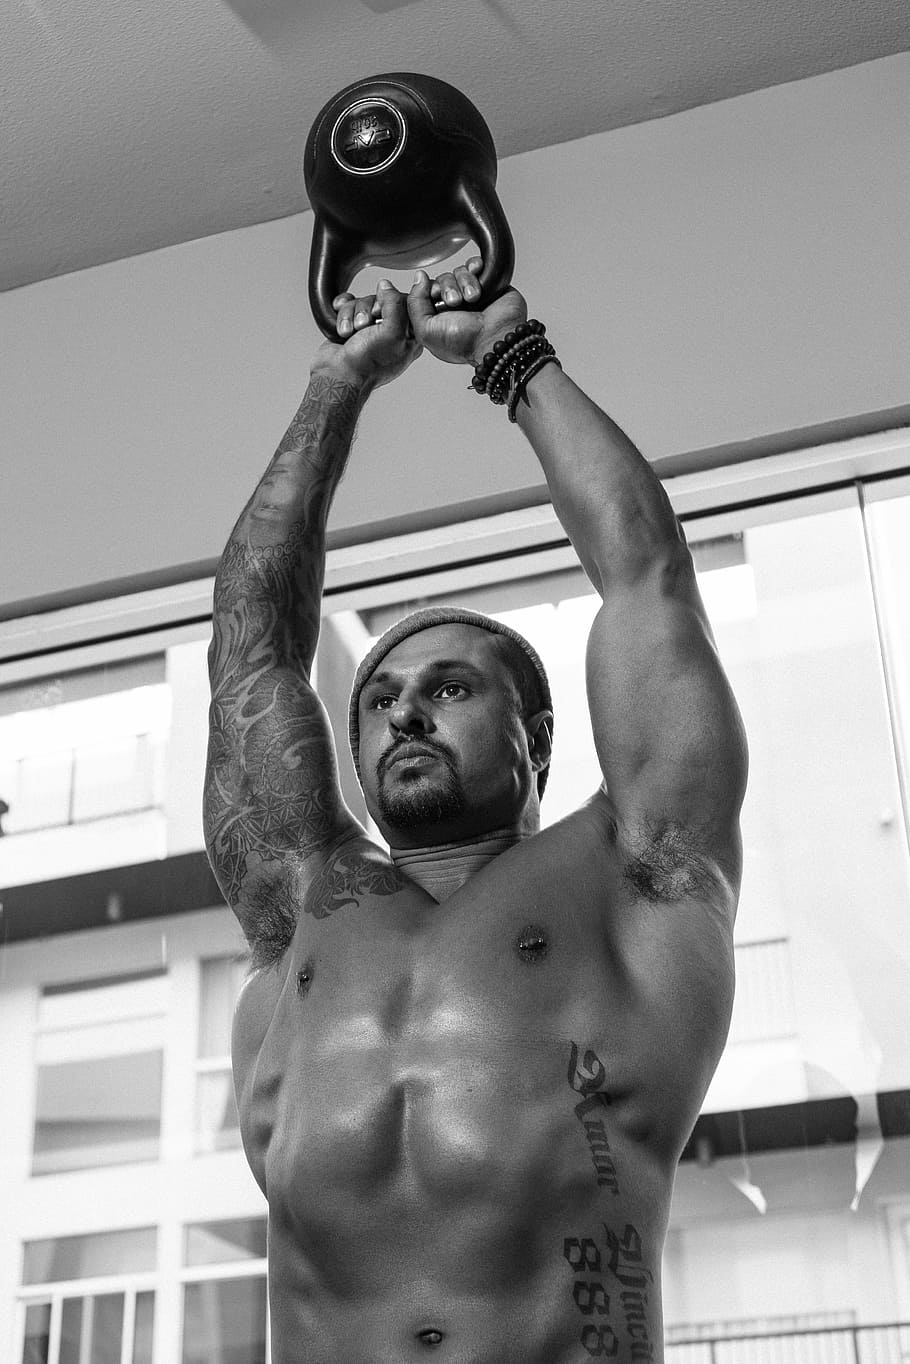 grayscale photo of man holding kettlebell, man lifting black kettle bell in grayscale photography